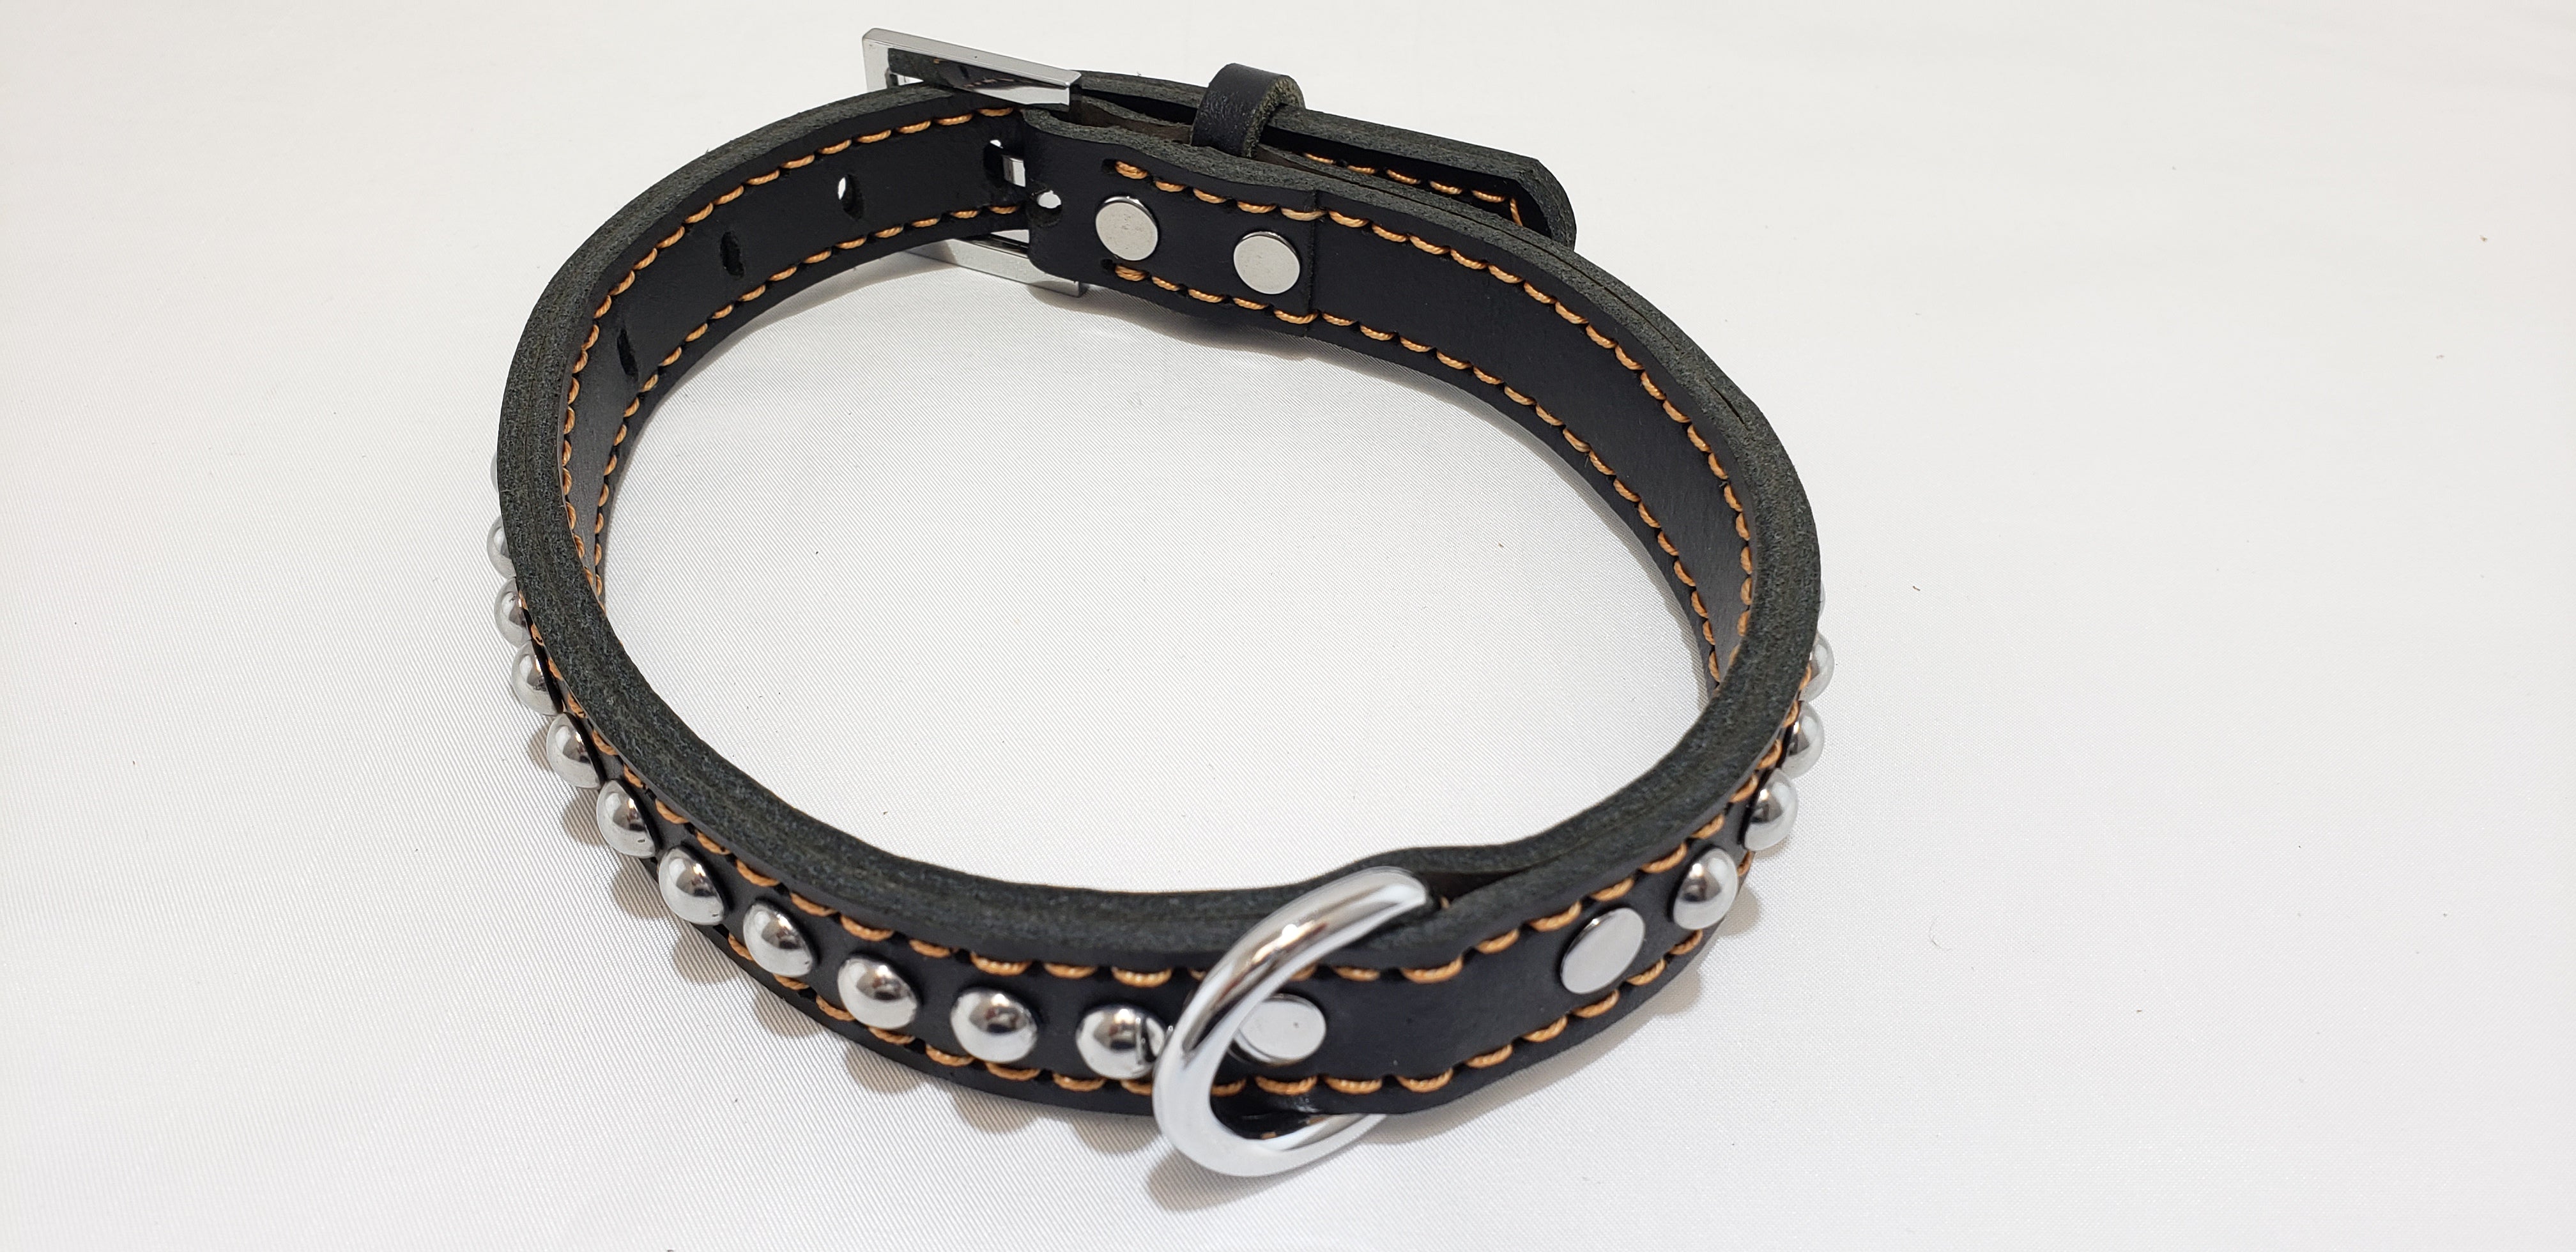 Leather Dog Collar with Single Line of Silver Chrome Buttons - Black - Small